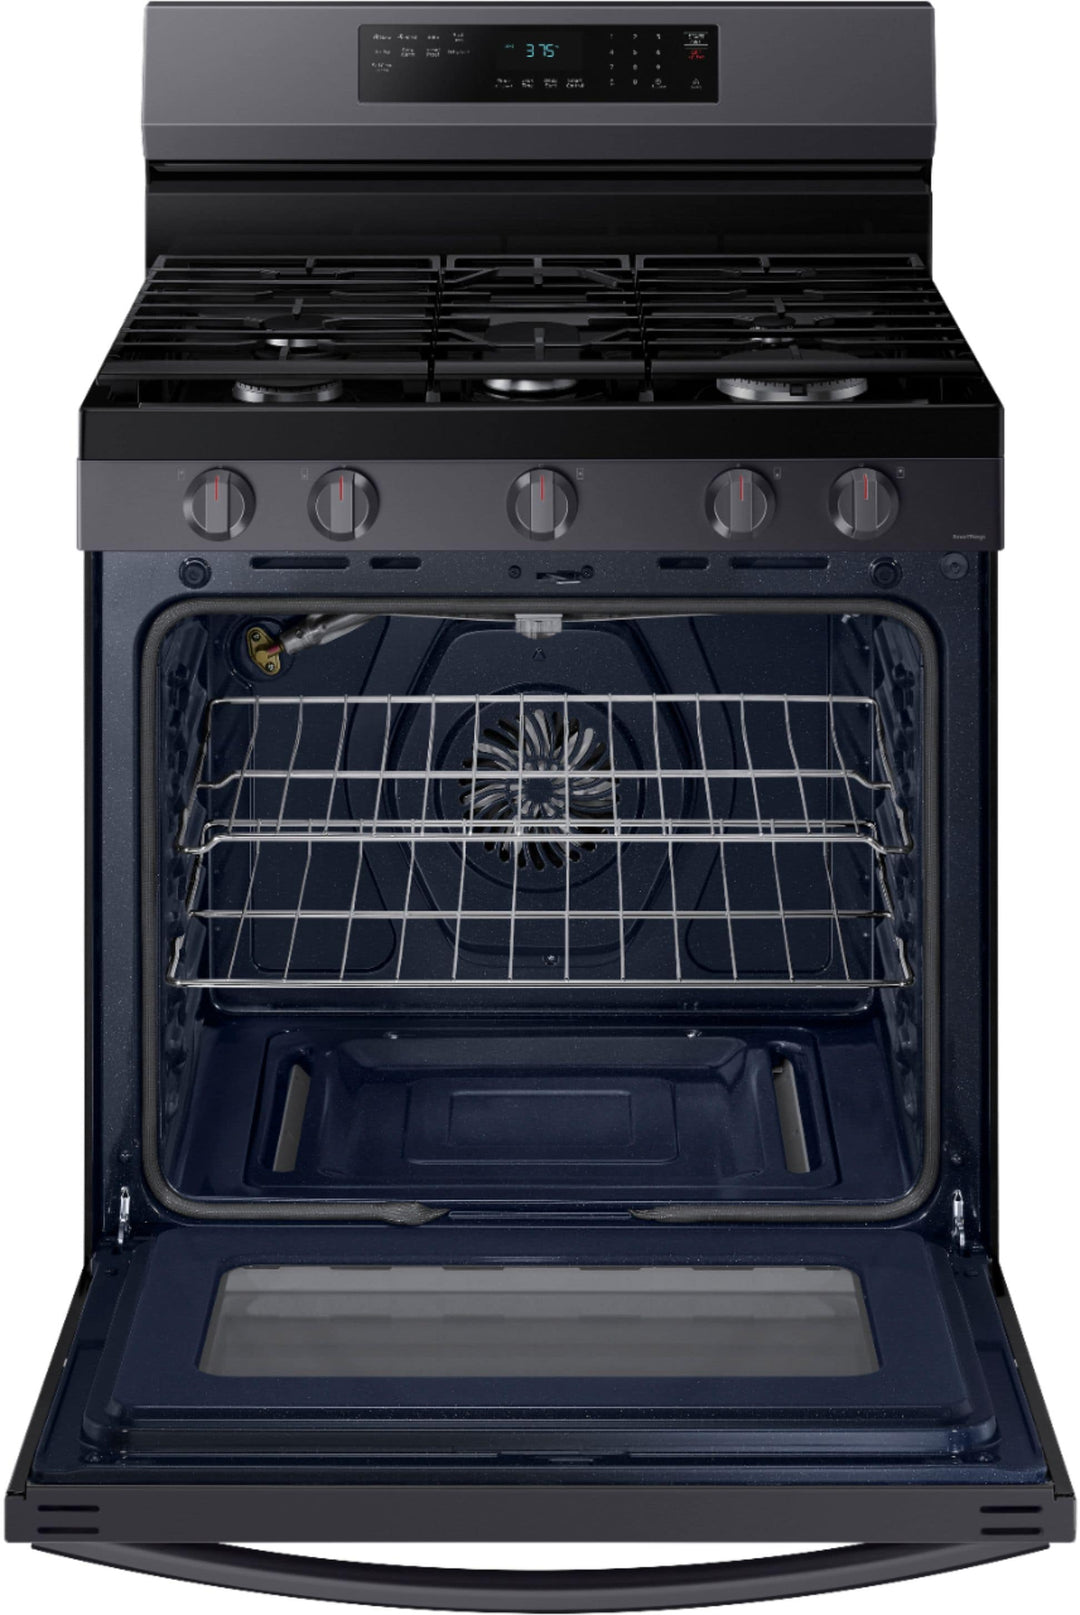 Samsung - 6.0 cu. ft. Freestanding Gas Range with WiFi, No-Preheat Air Fry & Convection - Black stainless steel_2